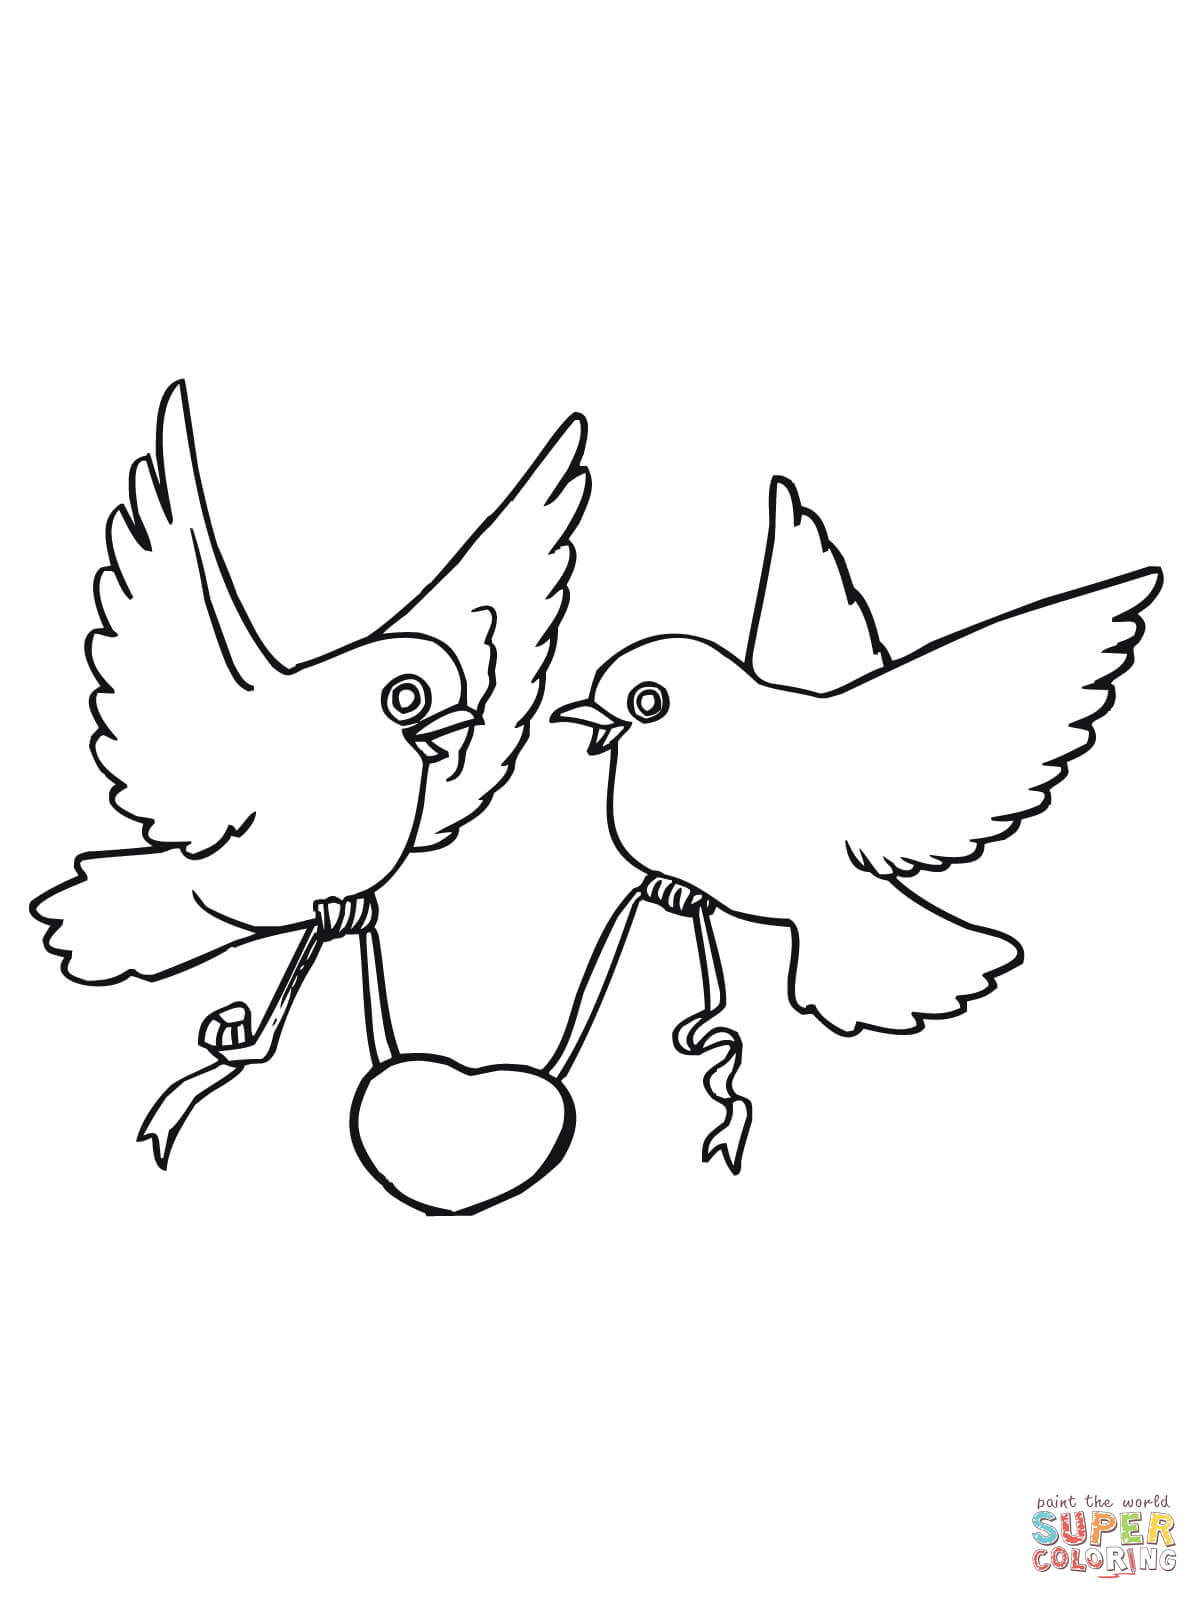 Love Birds With Hearts Coloring Page   Free Printable Coloring ...